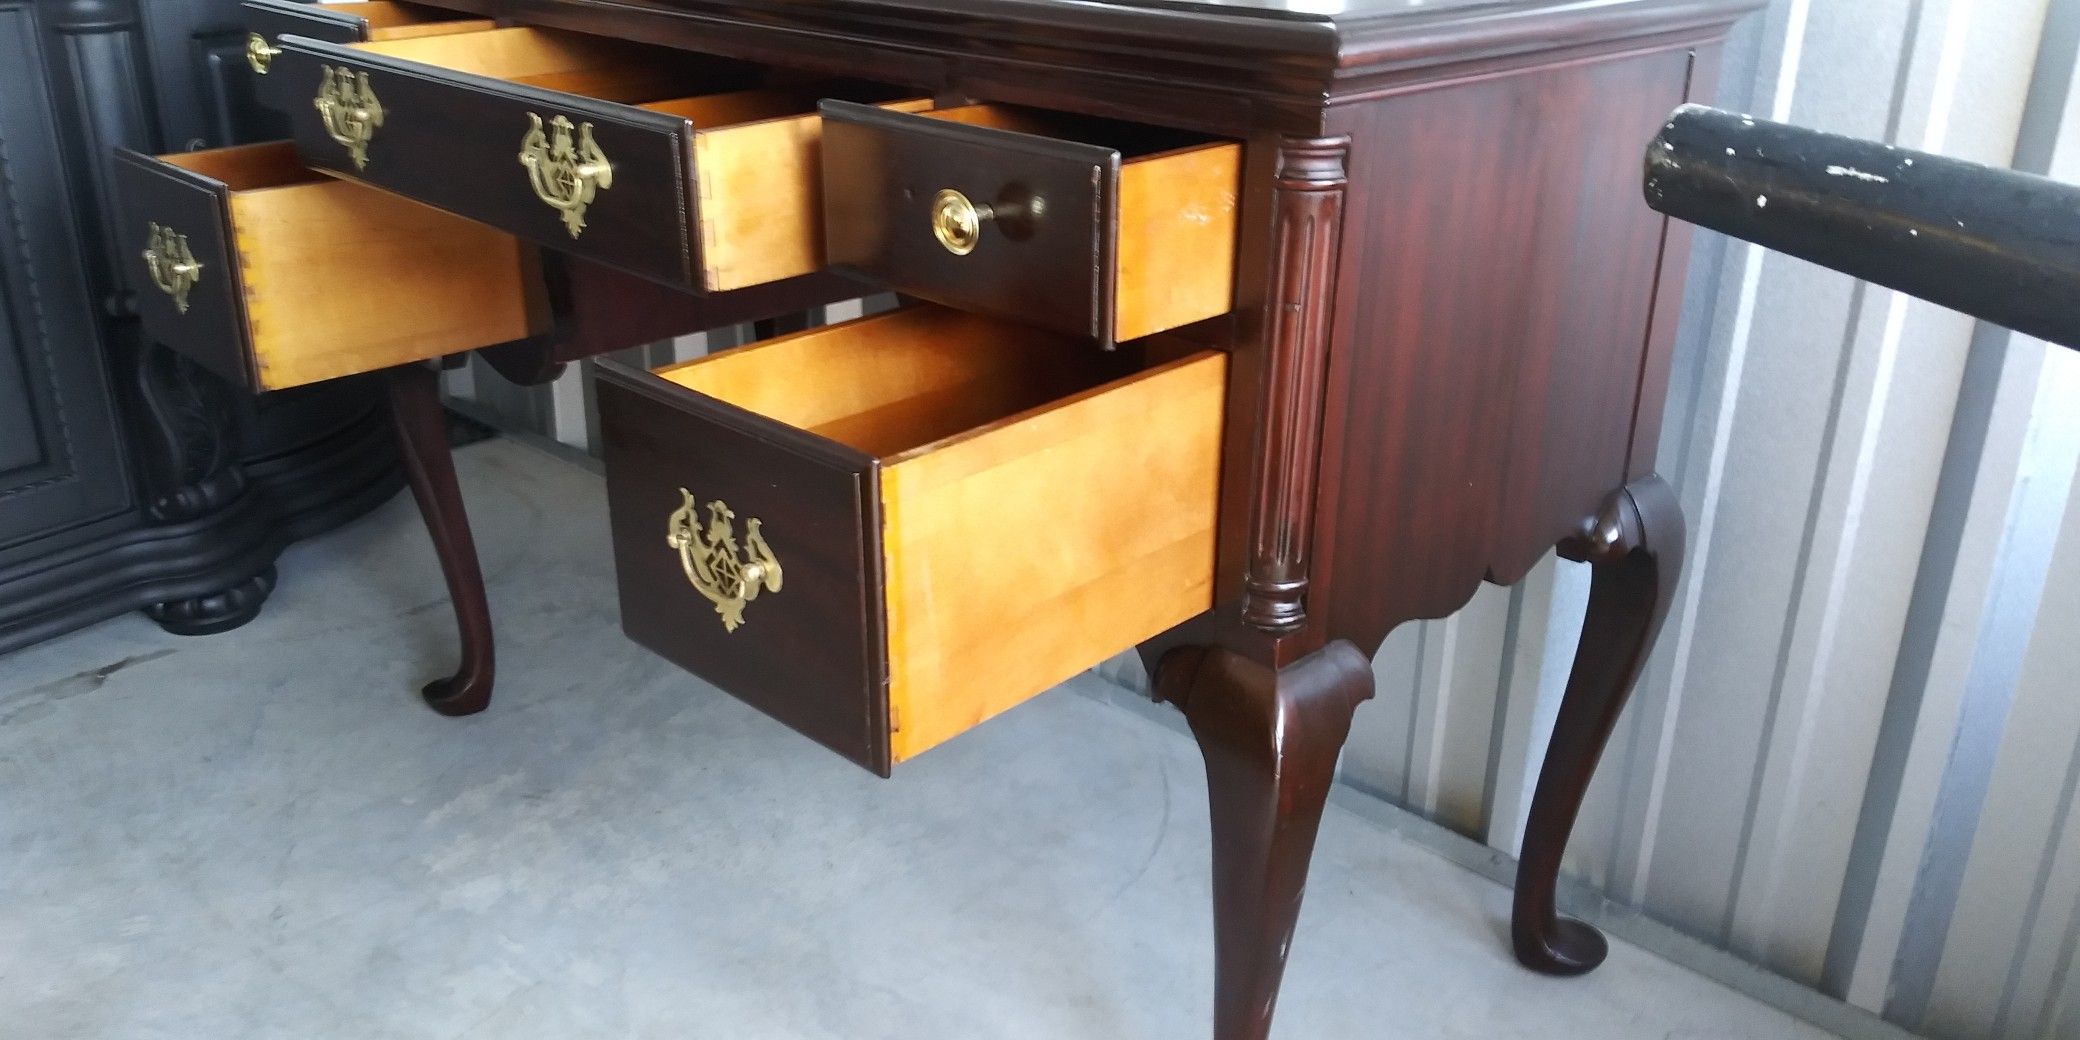 Antique Vanity Dresser/ Hall table/ stationary unit Solid Mahogany Wood refinish with a Mahogany. stainFREE DELIVERY